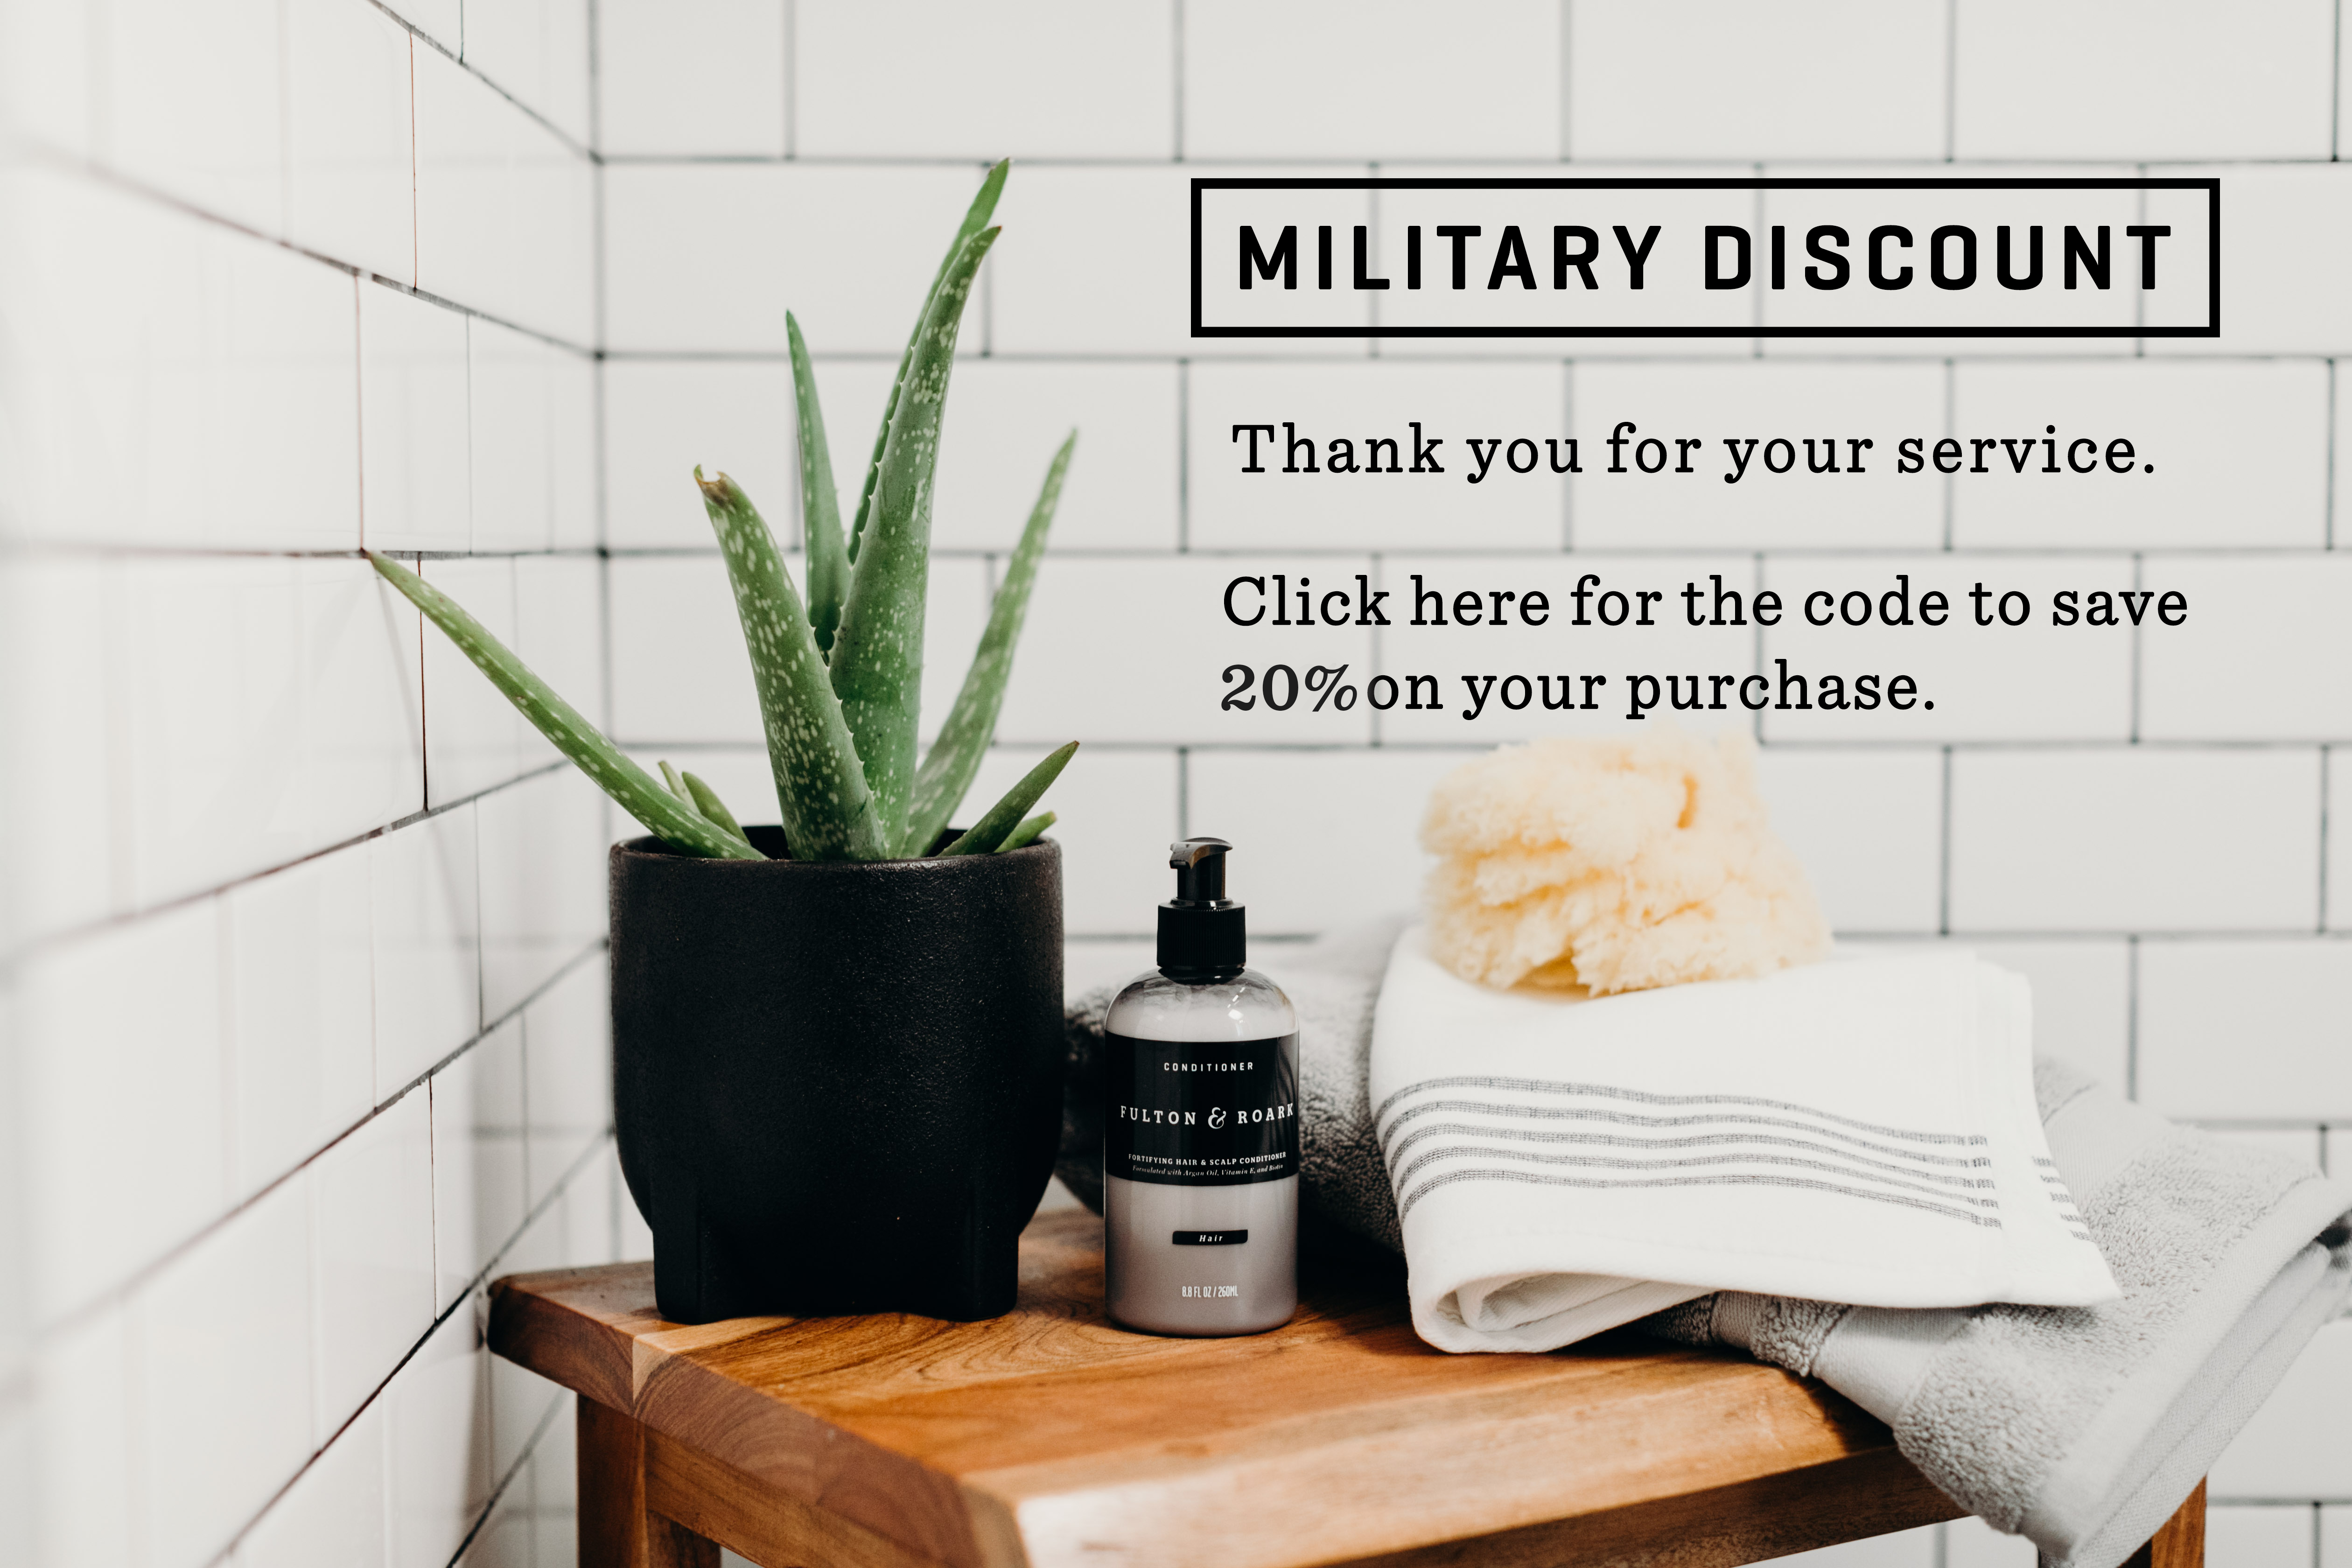 Military Discount. Thank you for your service. Click here for the code to save 20% on your purchase.